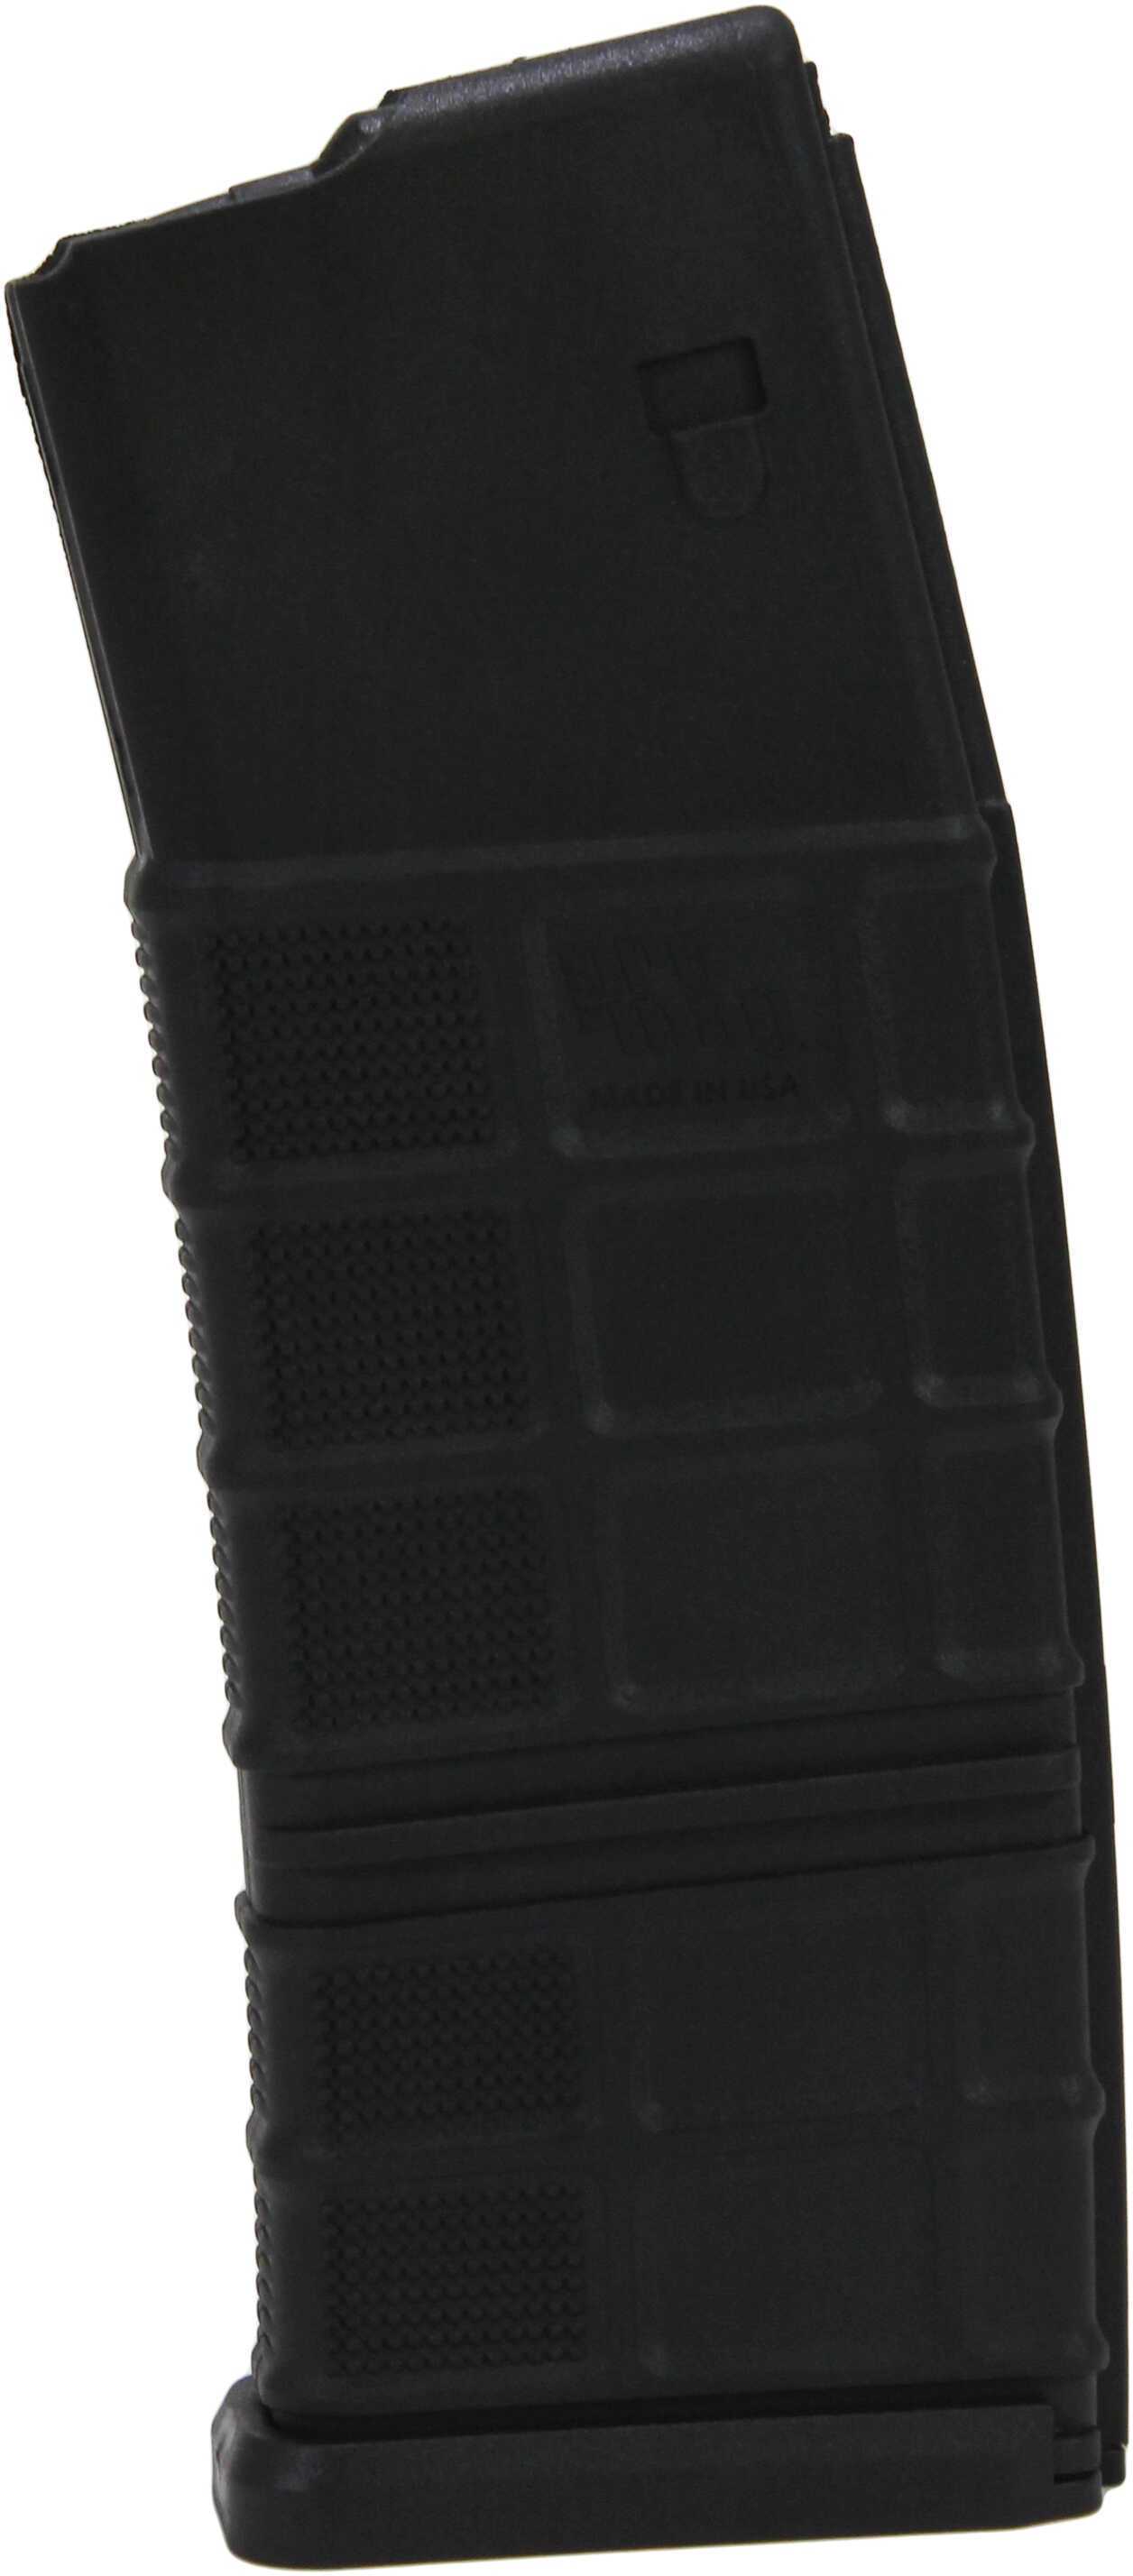 ProMag Magazine Fits AR10 308 Winchester/762NATO 30Rd Black Polymer DPM-A2